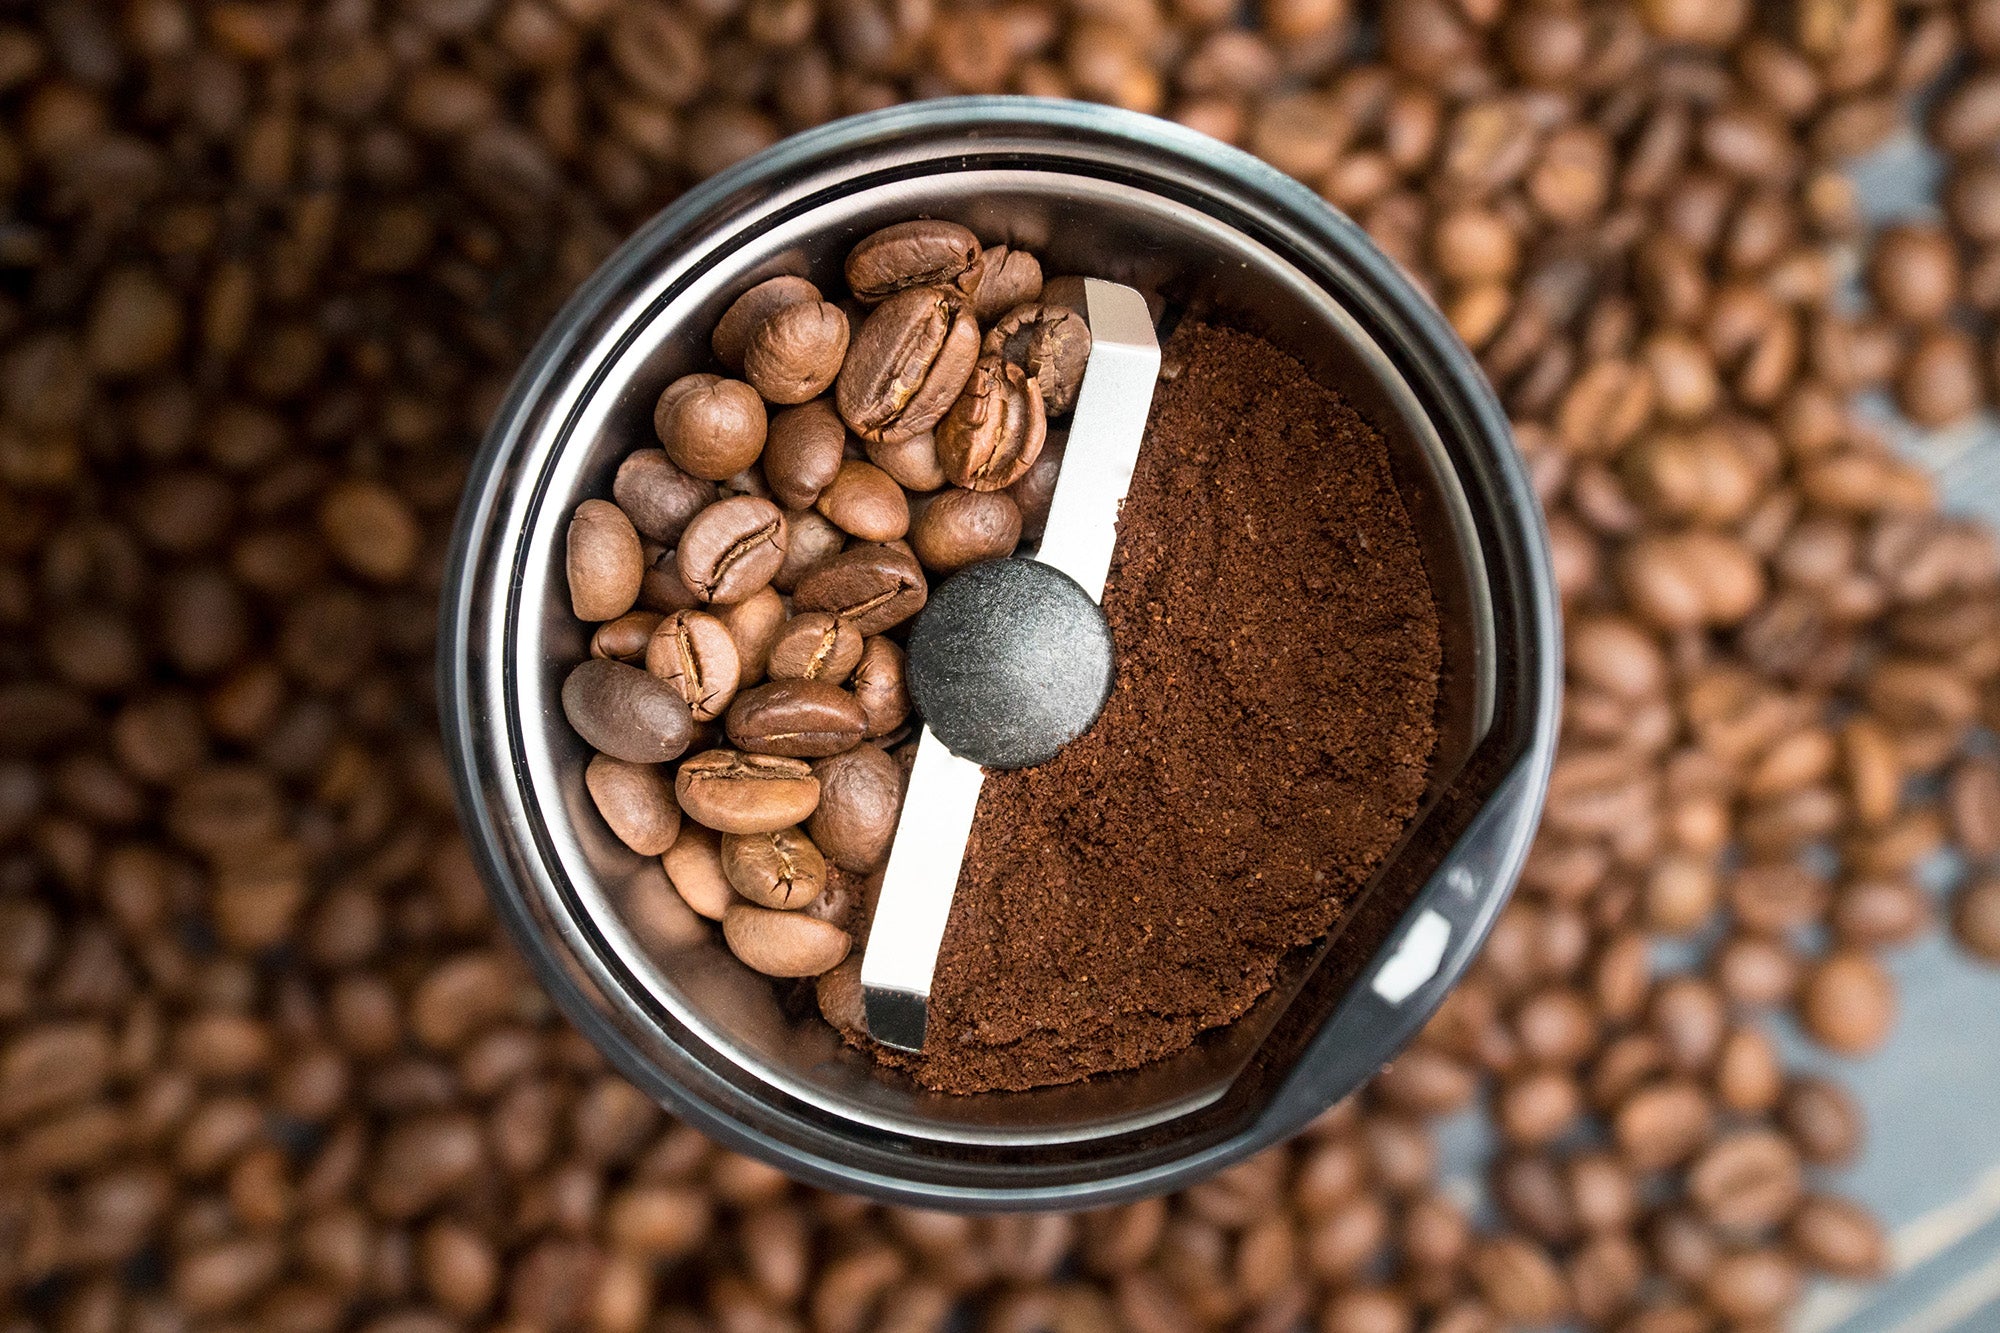 How to Choose the Best Coffee Grinder for Your Brewing Method